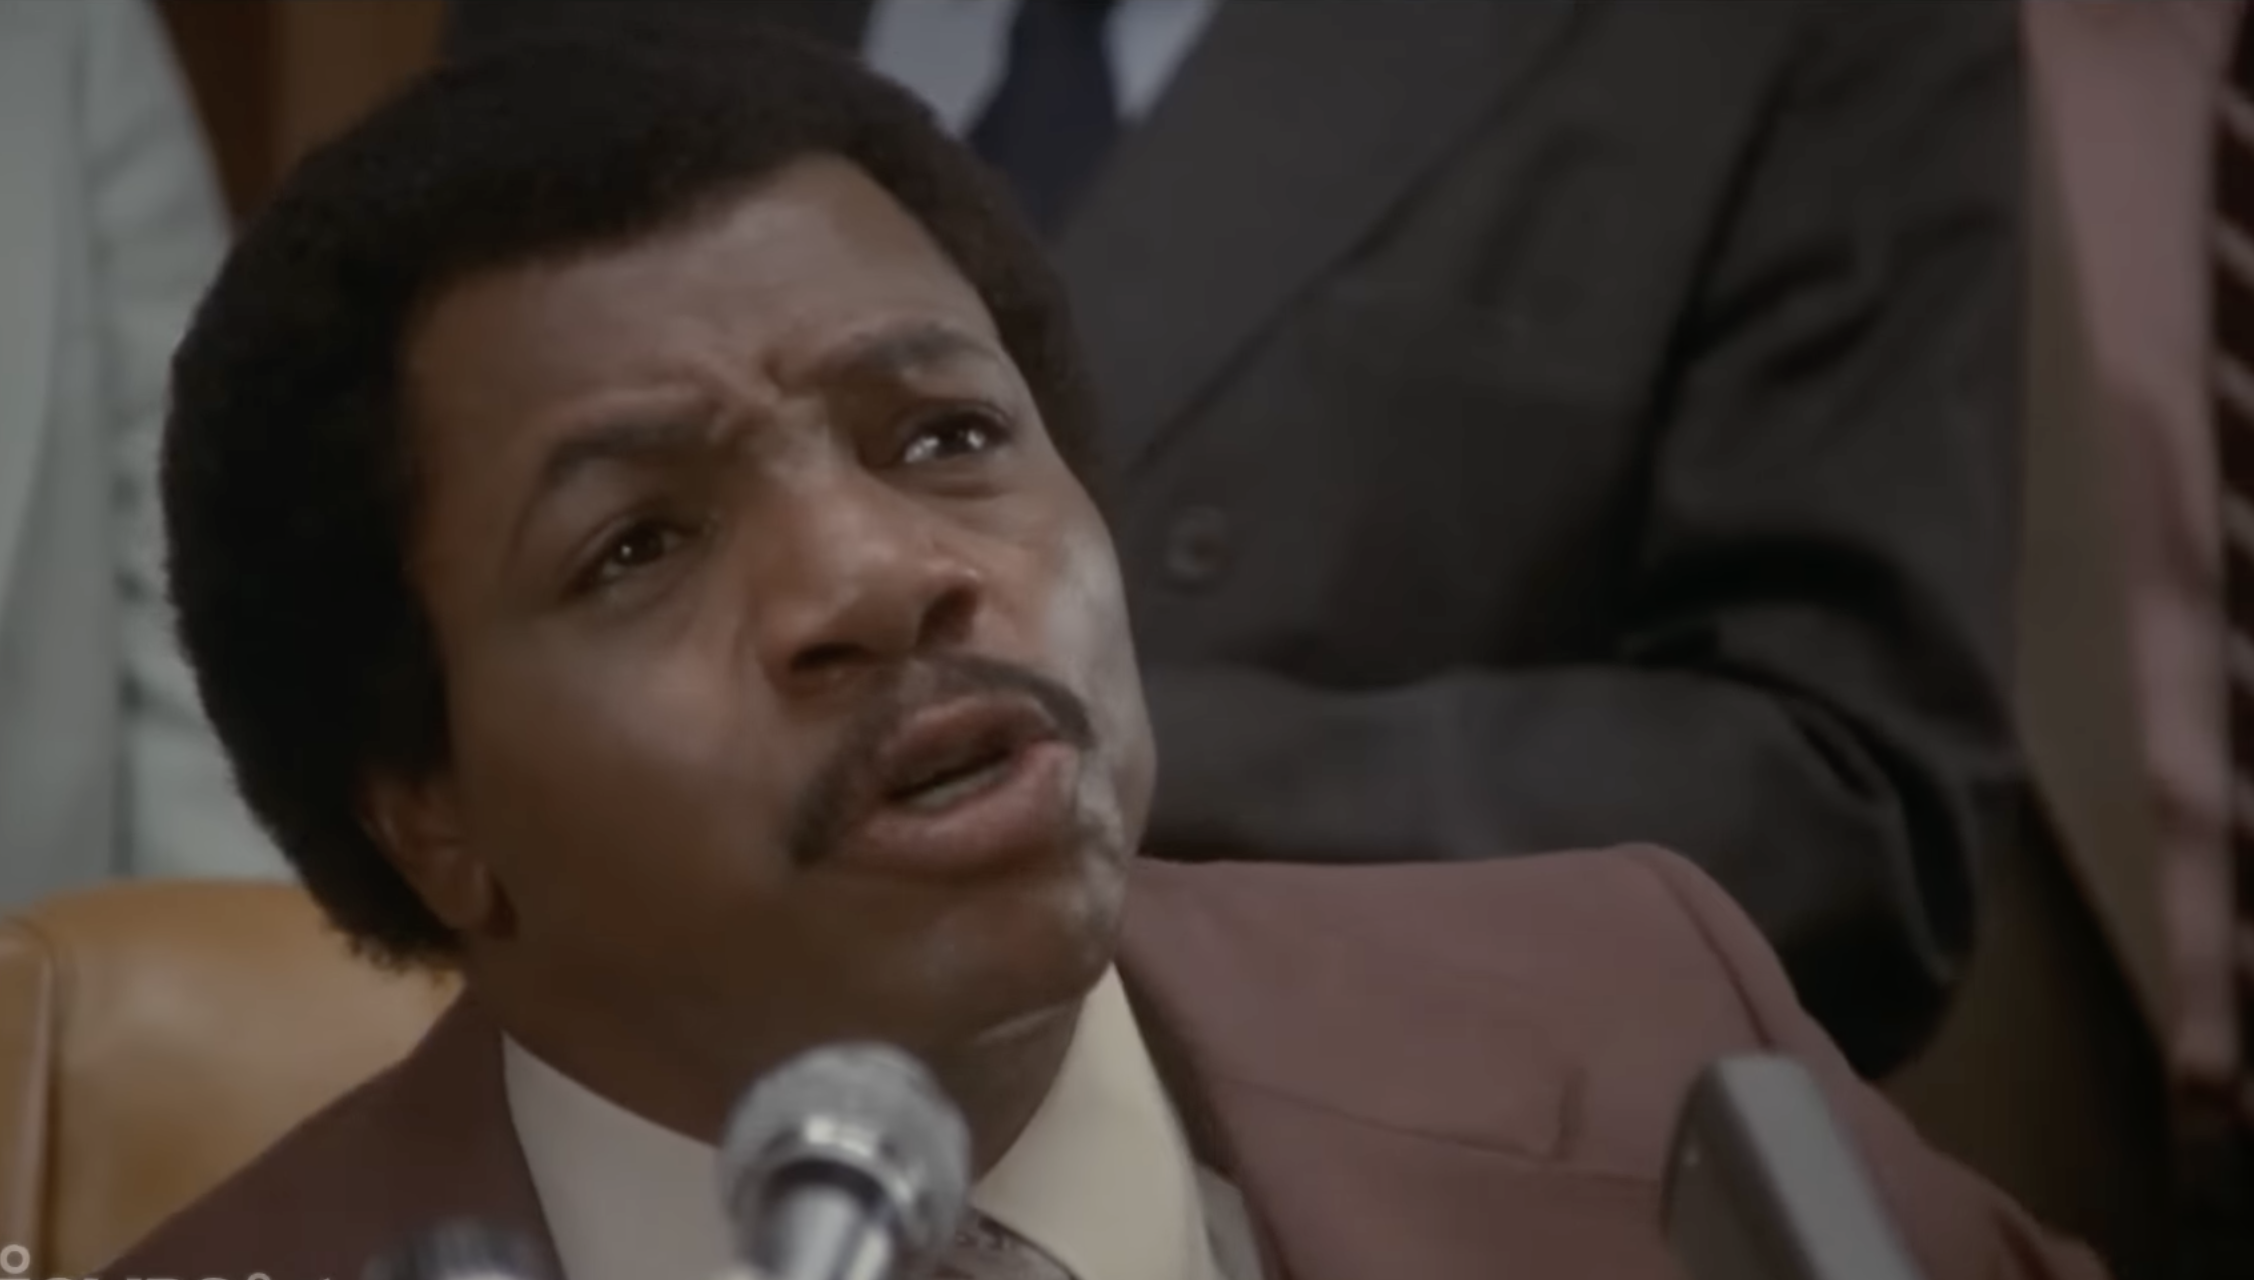 Carl Weathers: Not a skilled fighter, but a talented actor